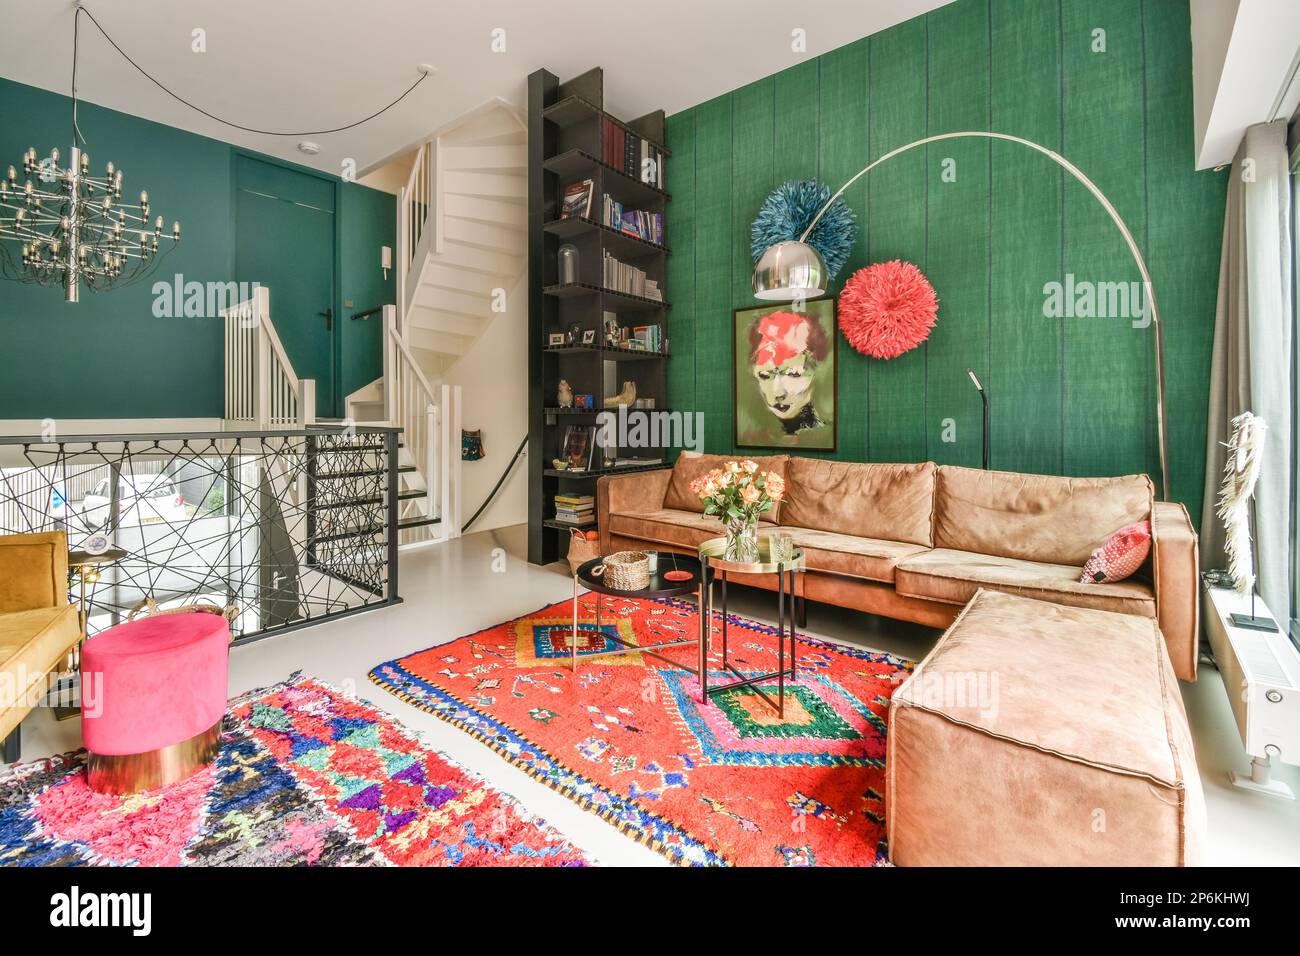 a living room with green walls and colorful rugs on the floor in front of couches, coffee tables and chairs Stock Photo